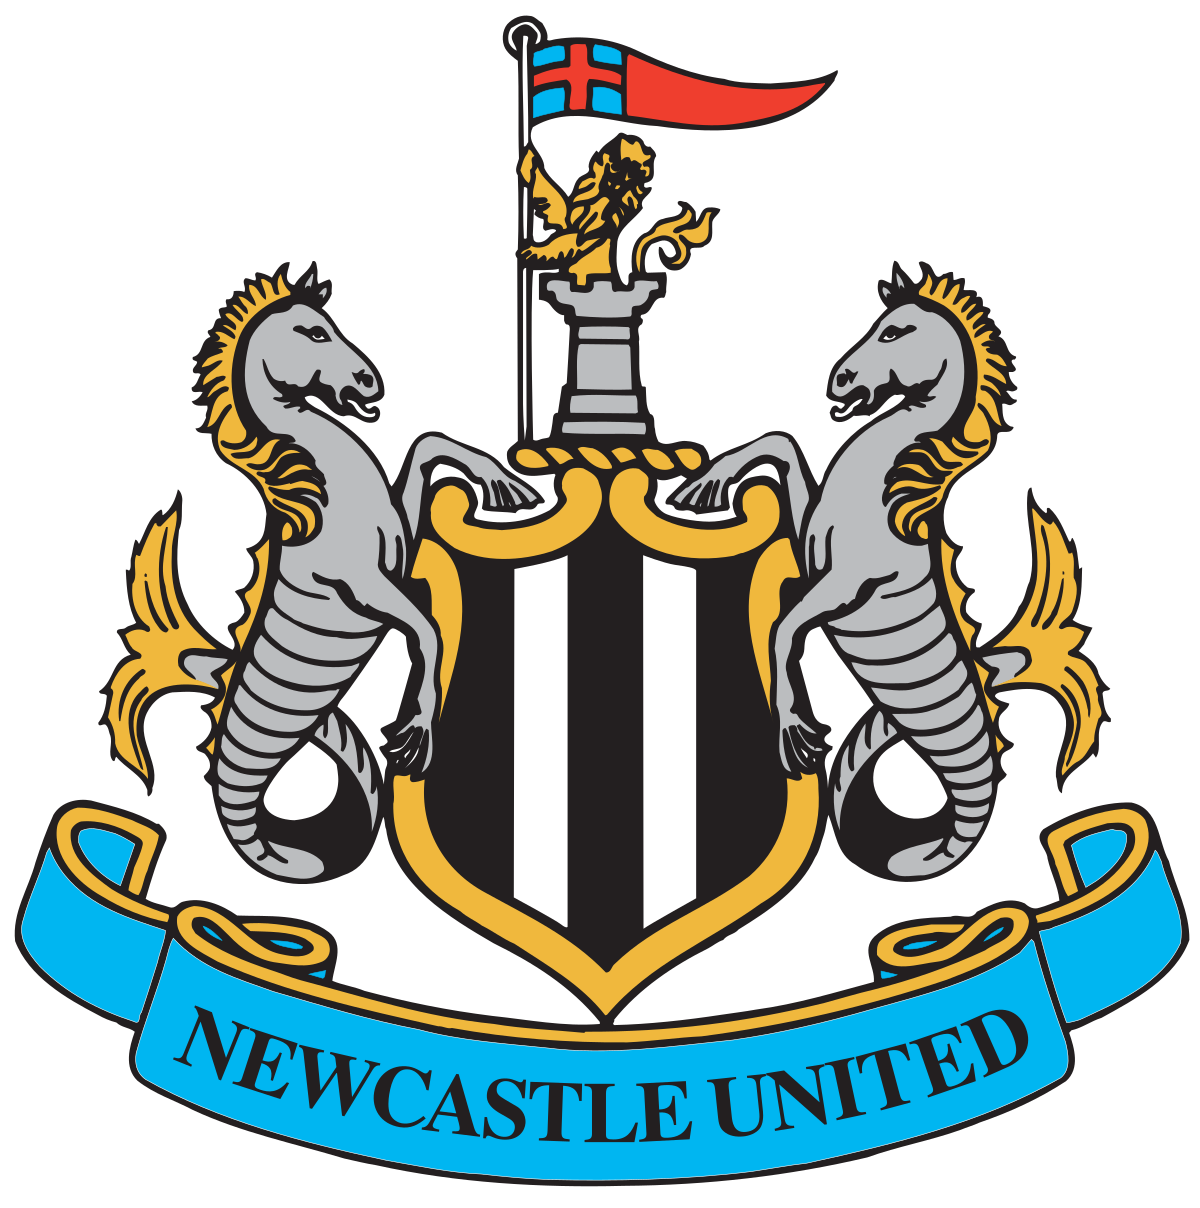 Breaking BBC reporter confirms Newcastle have internal measure challenge to settle ahead of Champions League tie